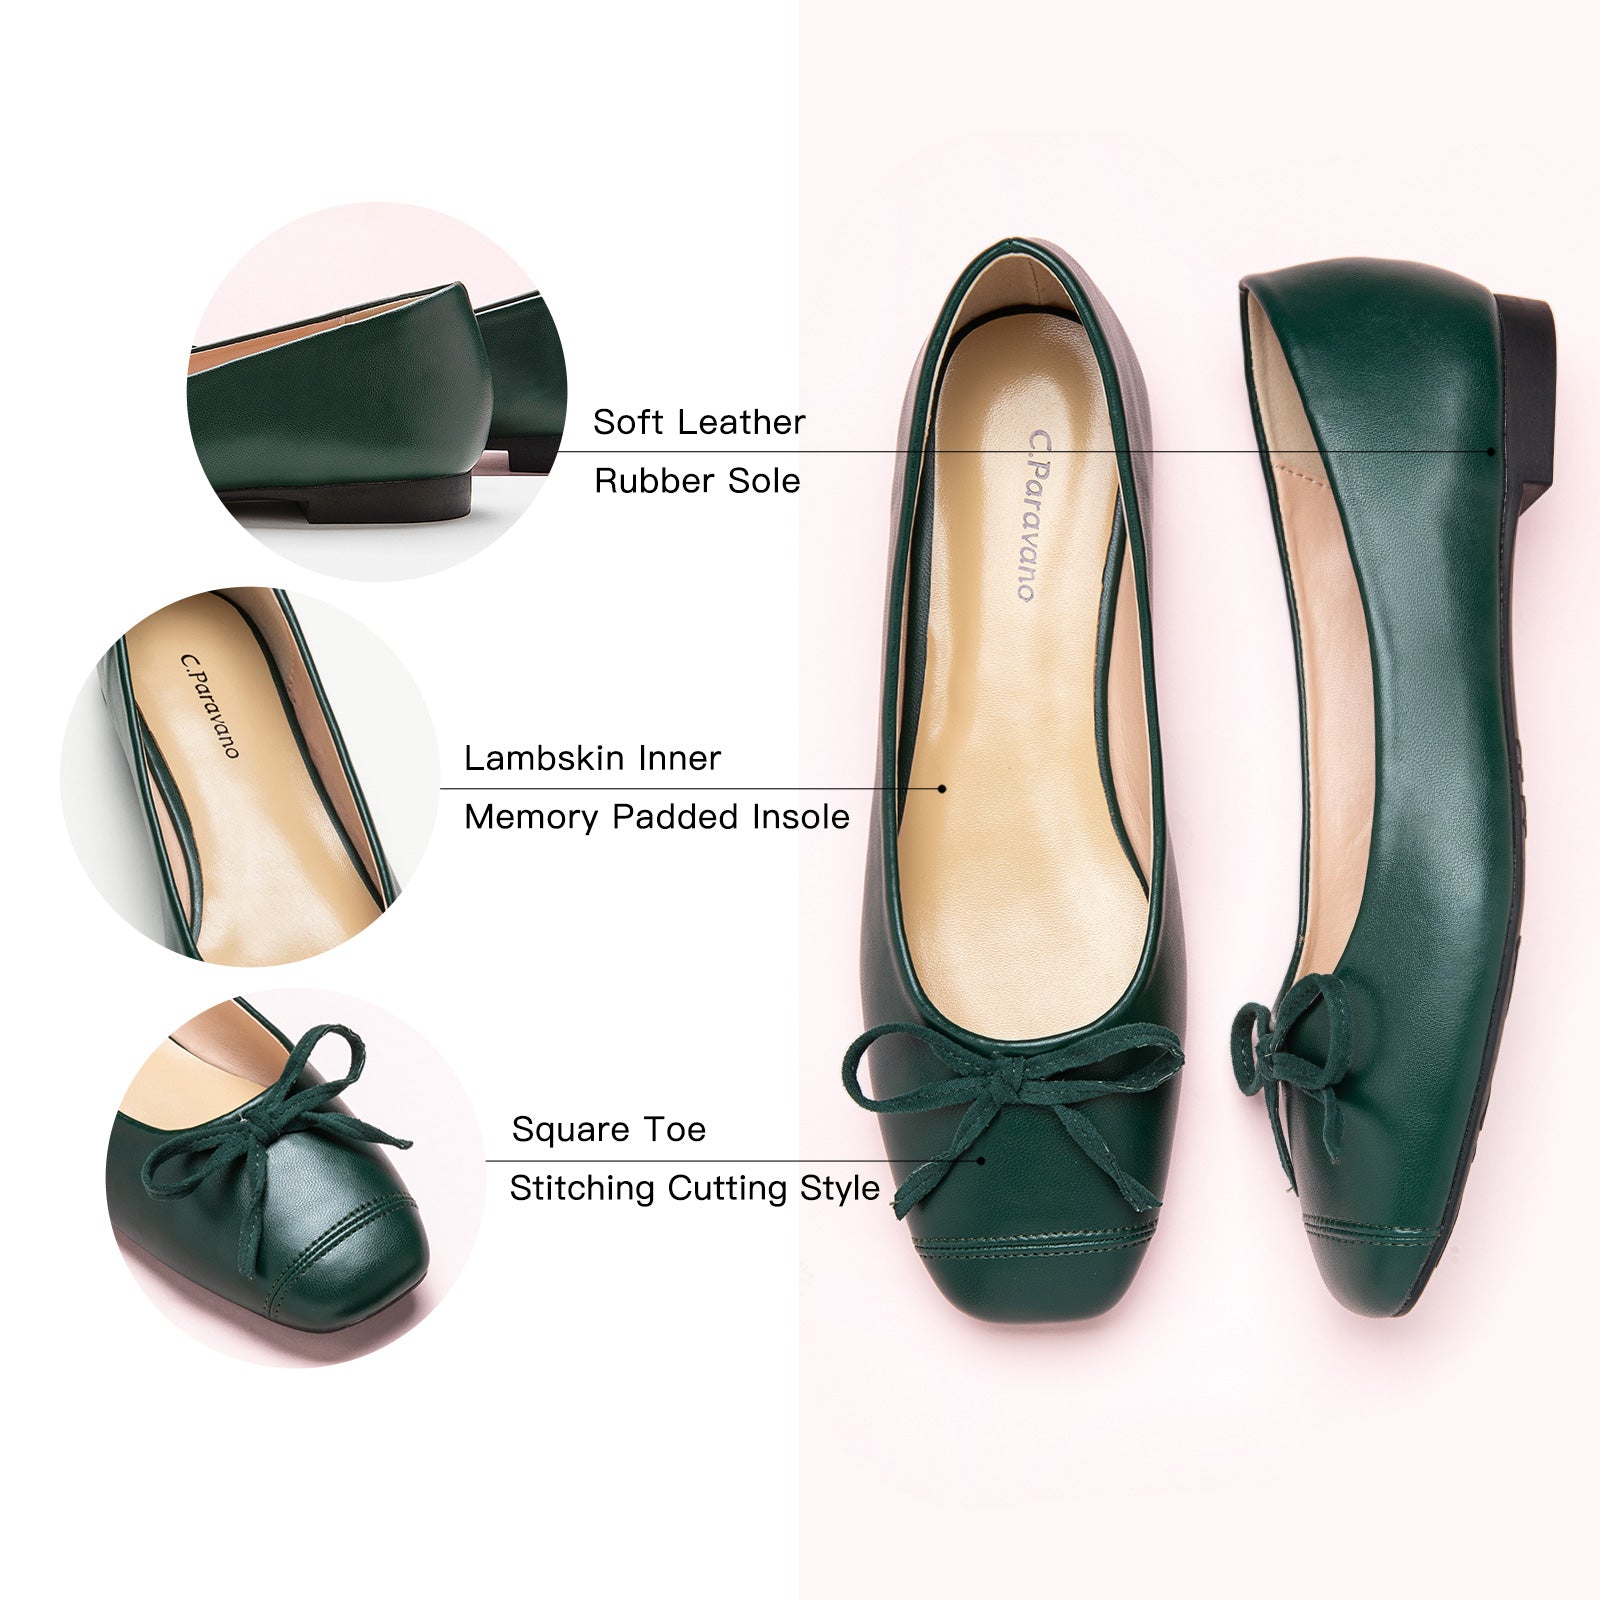  Dark Green Toe Bowknot Ballet Flats in Suede, perfect for a confident and fashionable look in any urban setting.